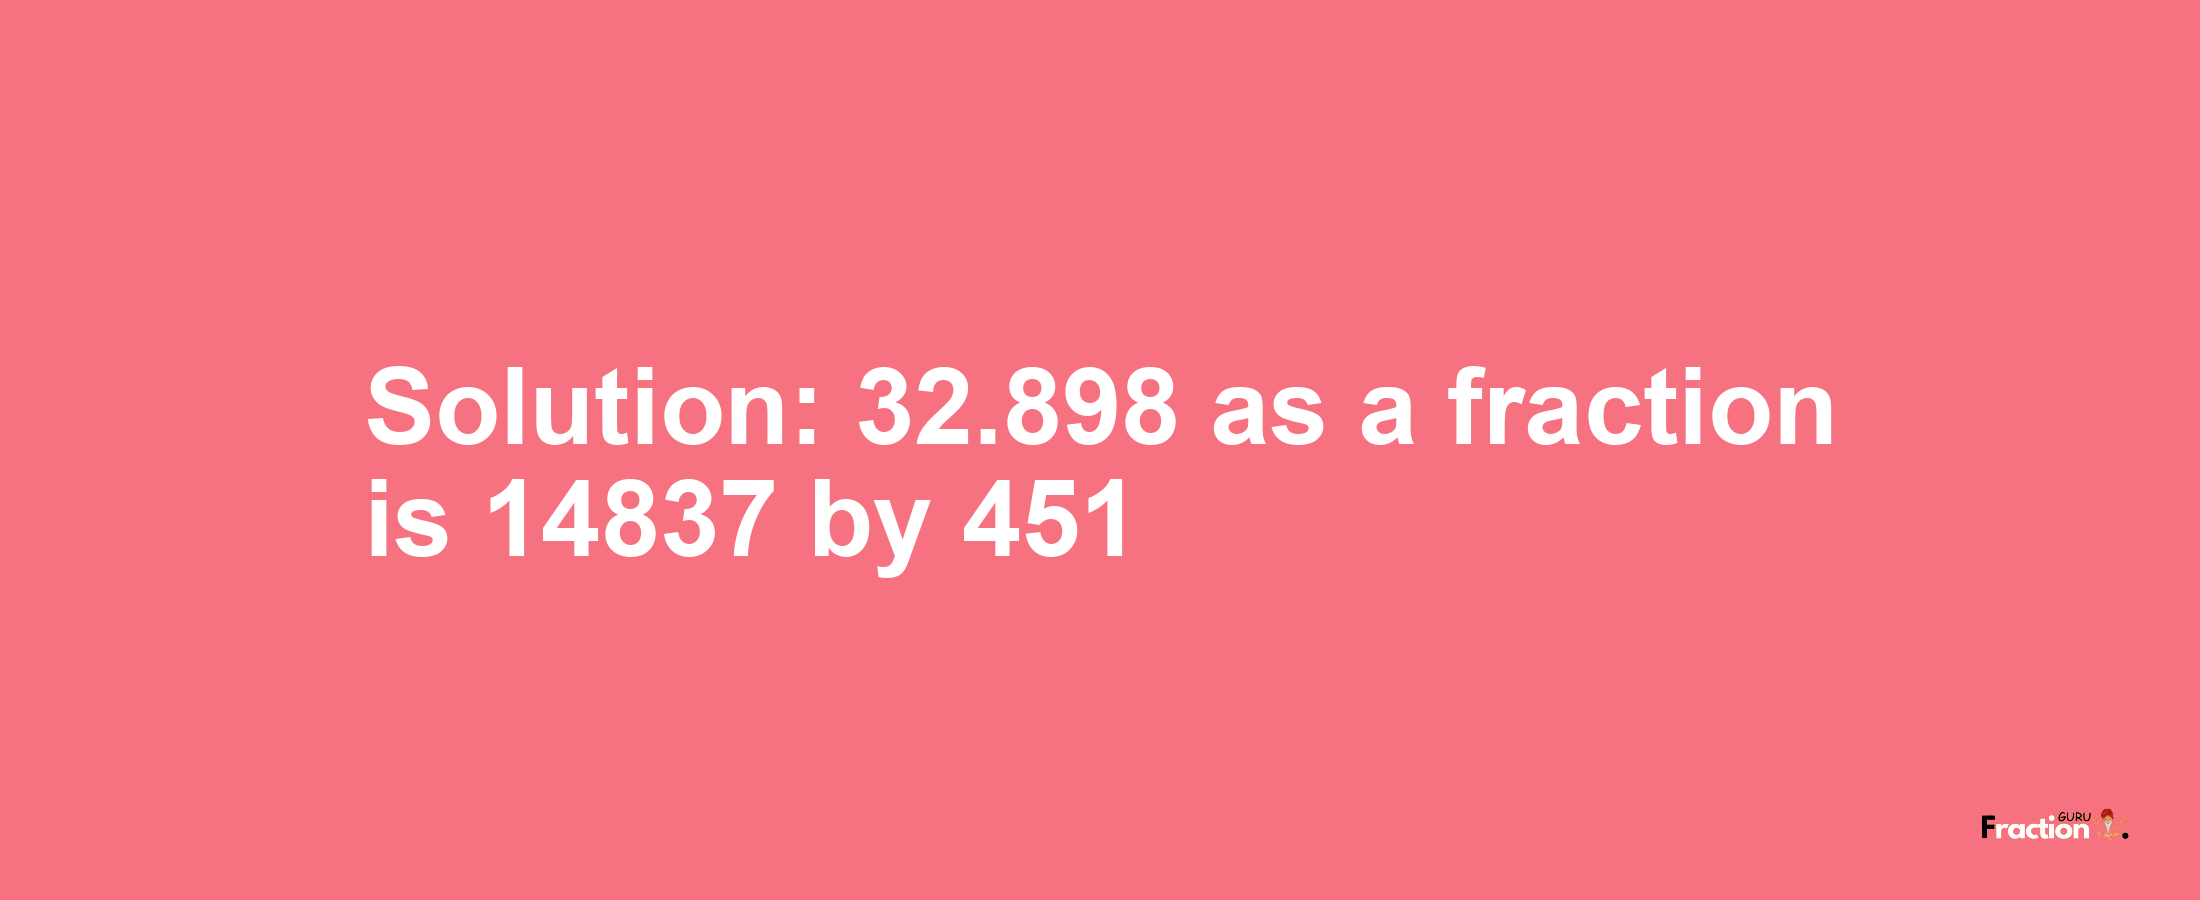 Solution:32.898 as a fraction is 14837/451